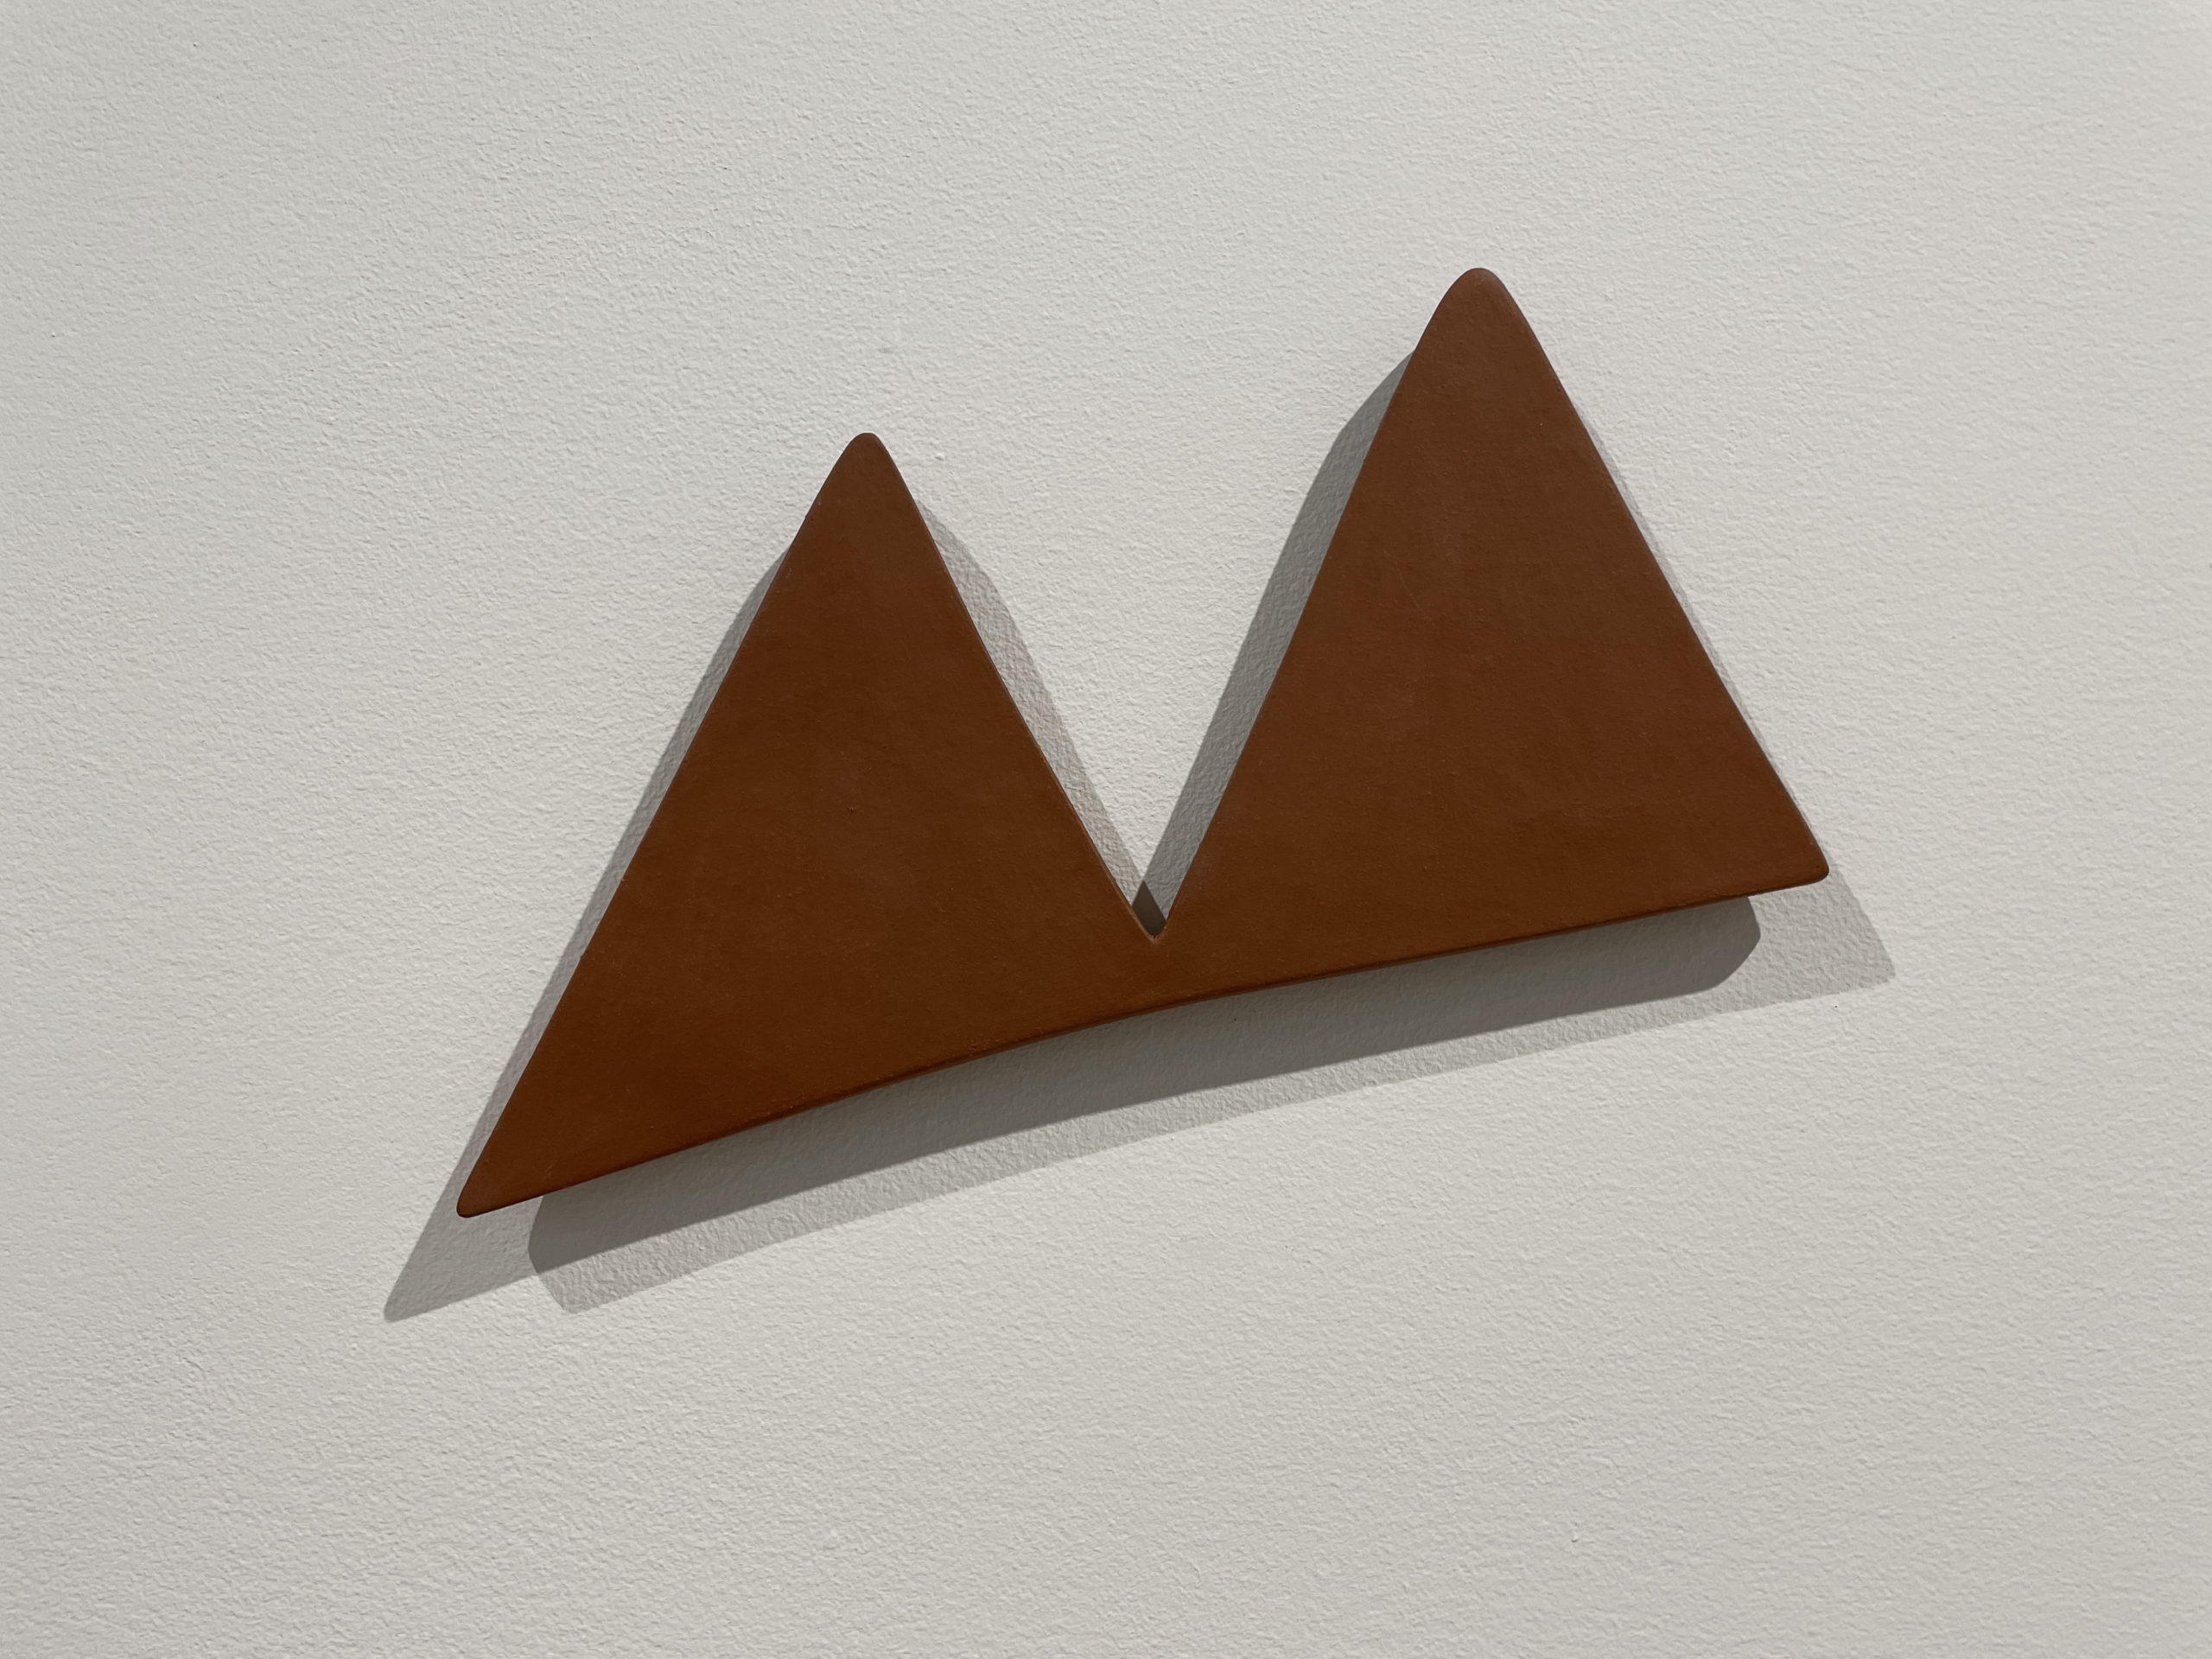 brown ceramic mountain-like shape about a quarter inch thick